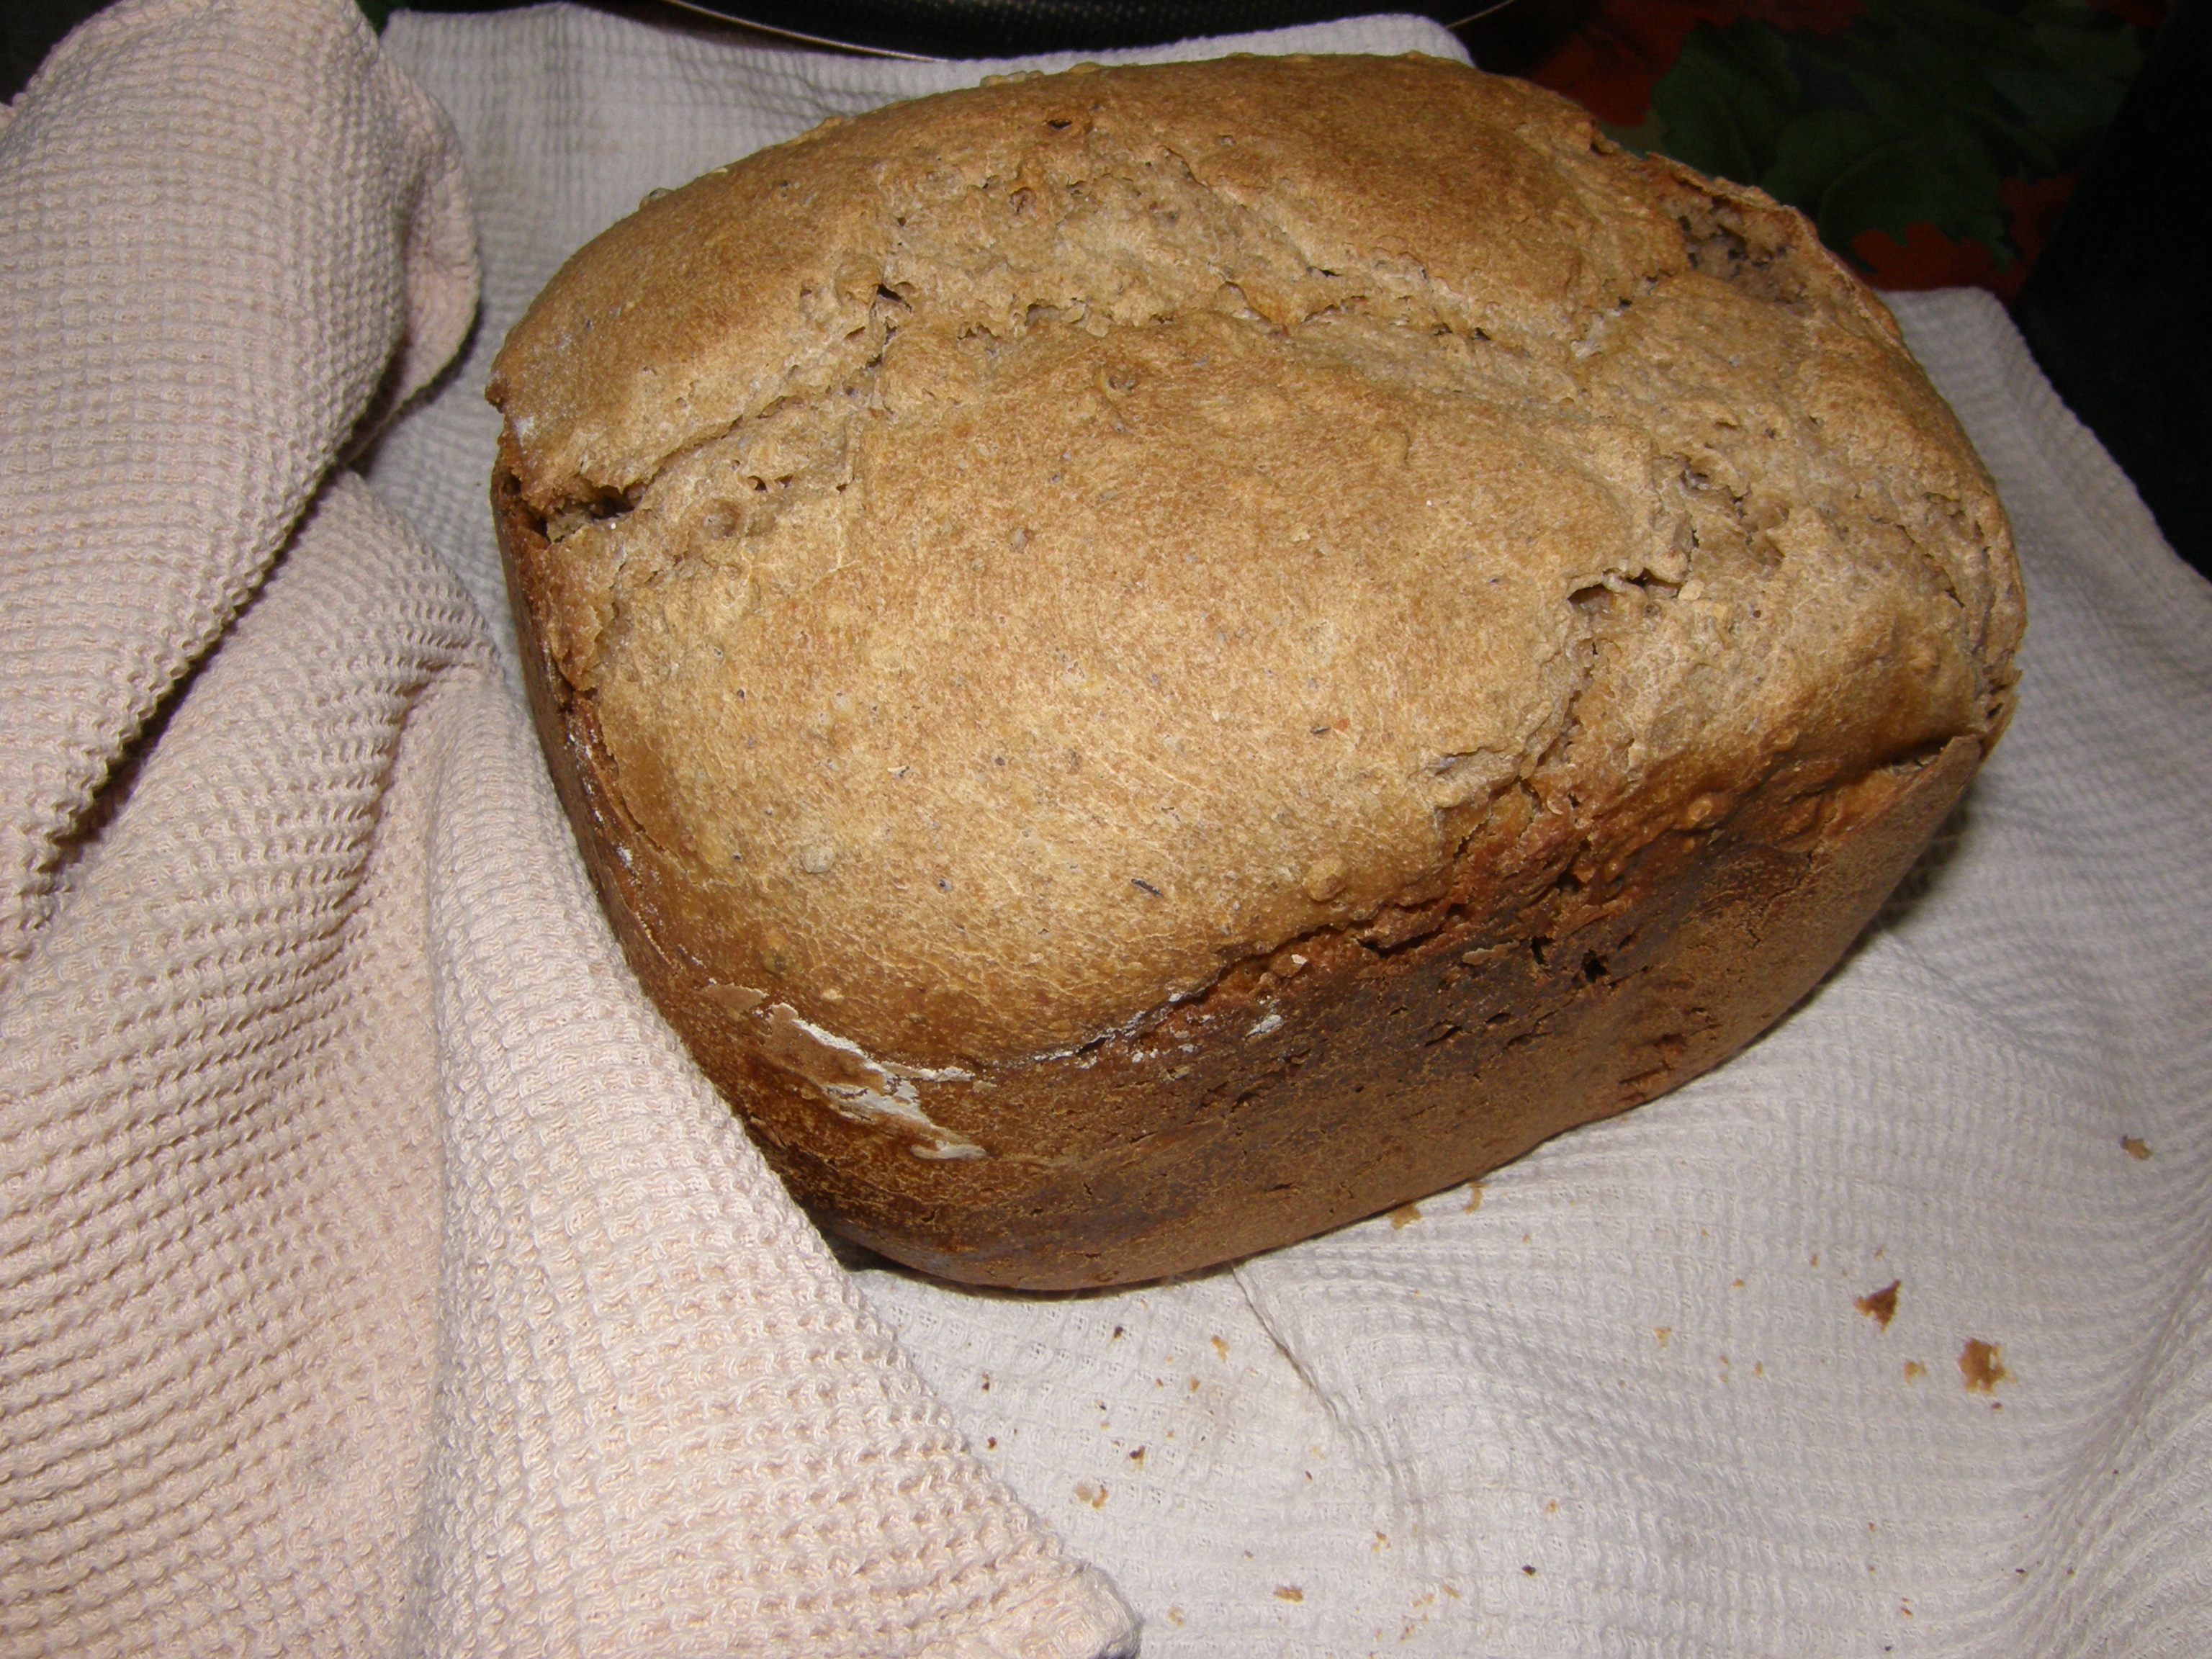 Rye-wheat bread with lentils and coriander.